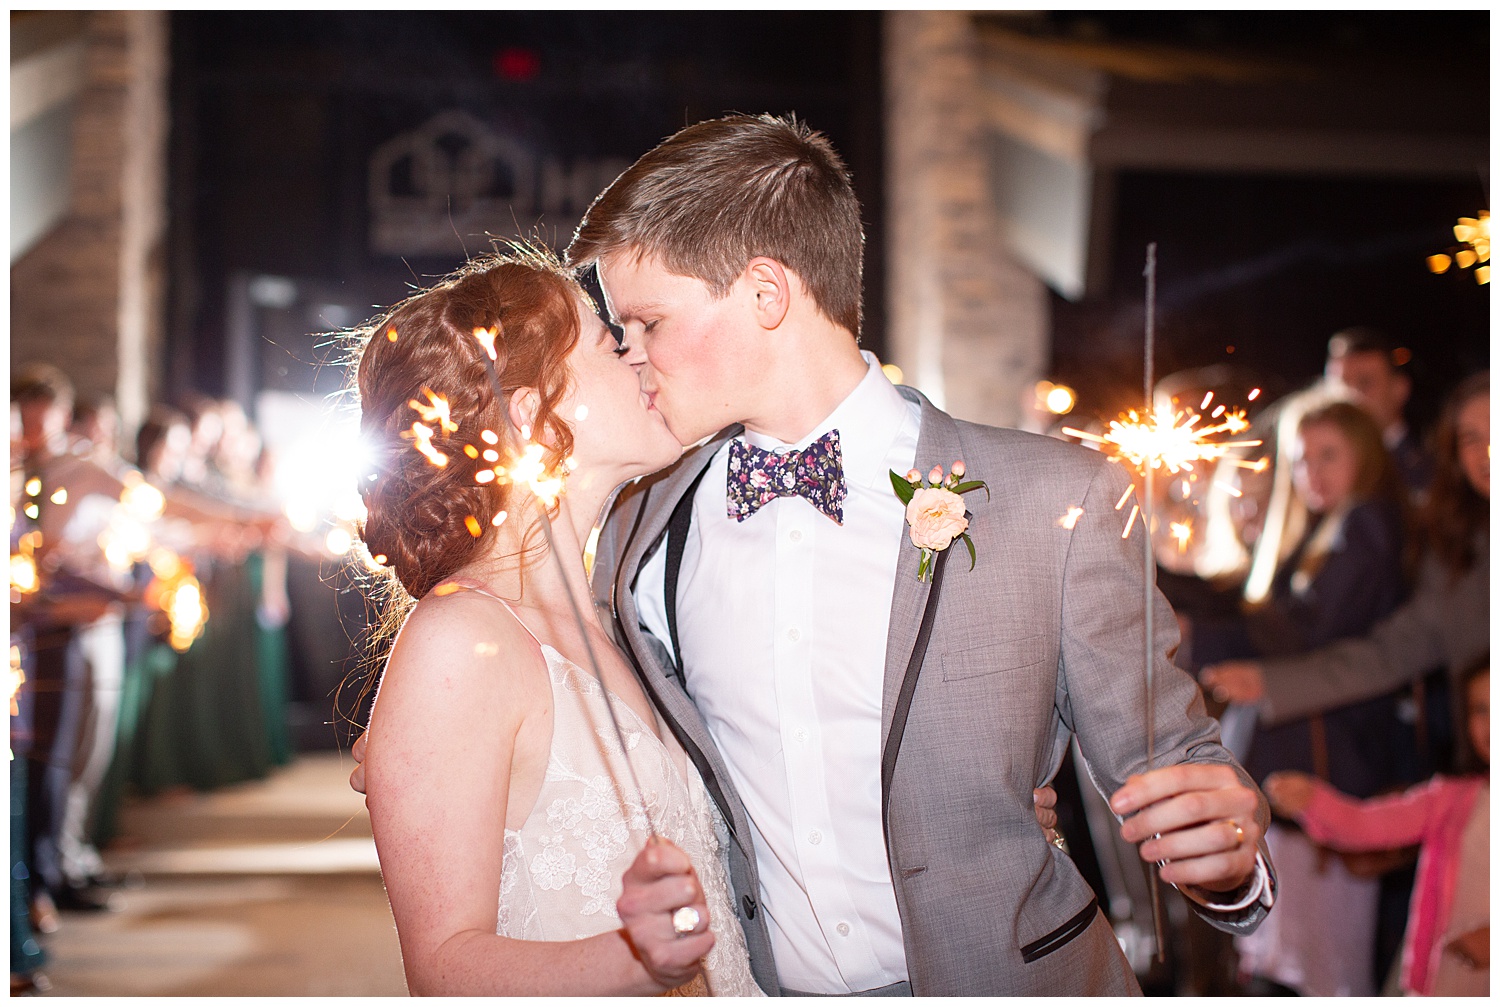 Bride and groom sharing a kiss with sparklers after their rainy wedding in the spring.